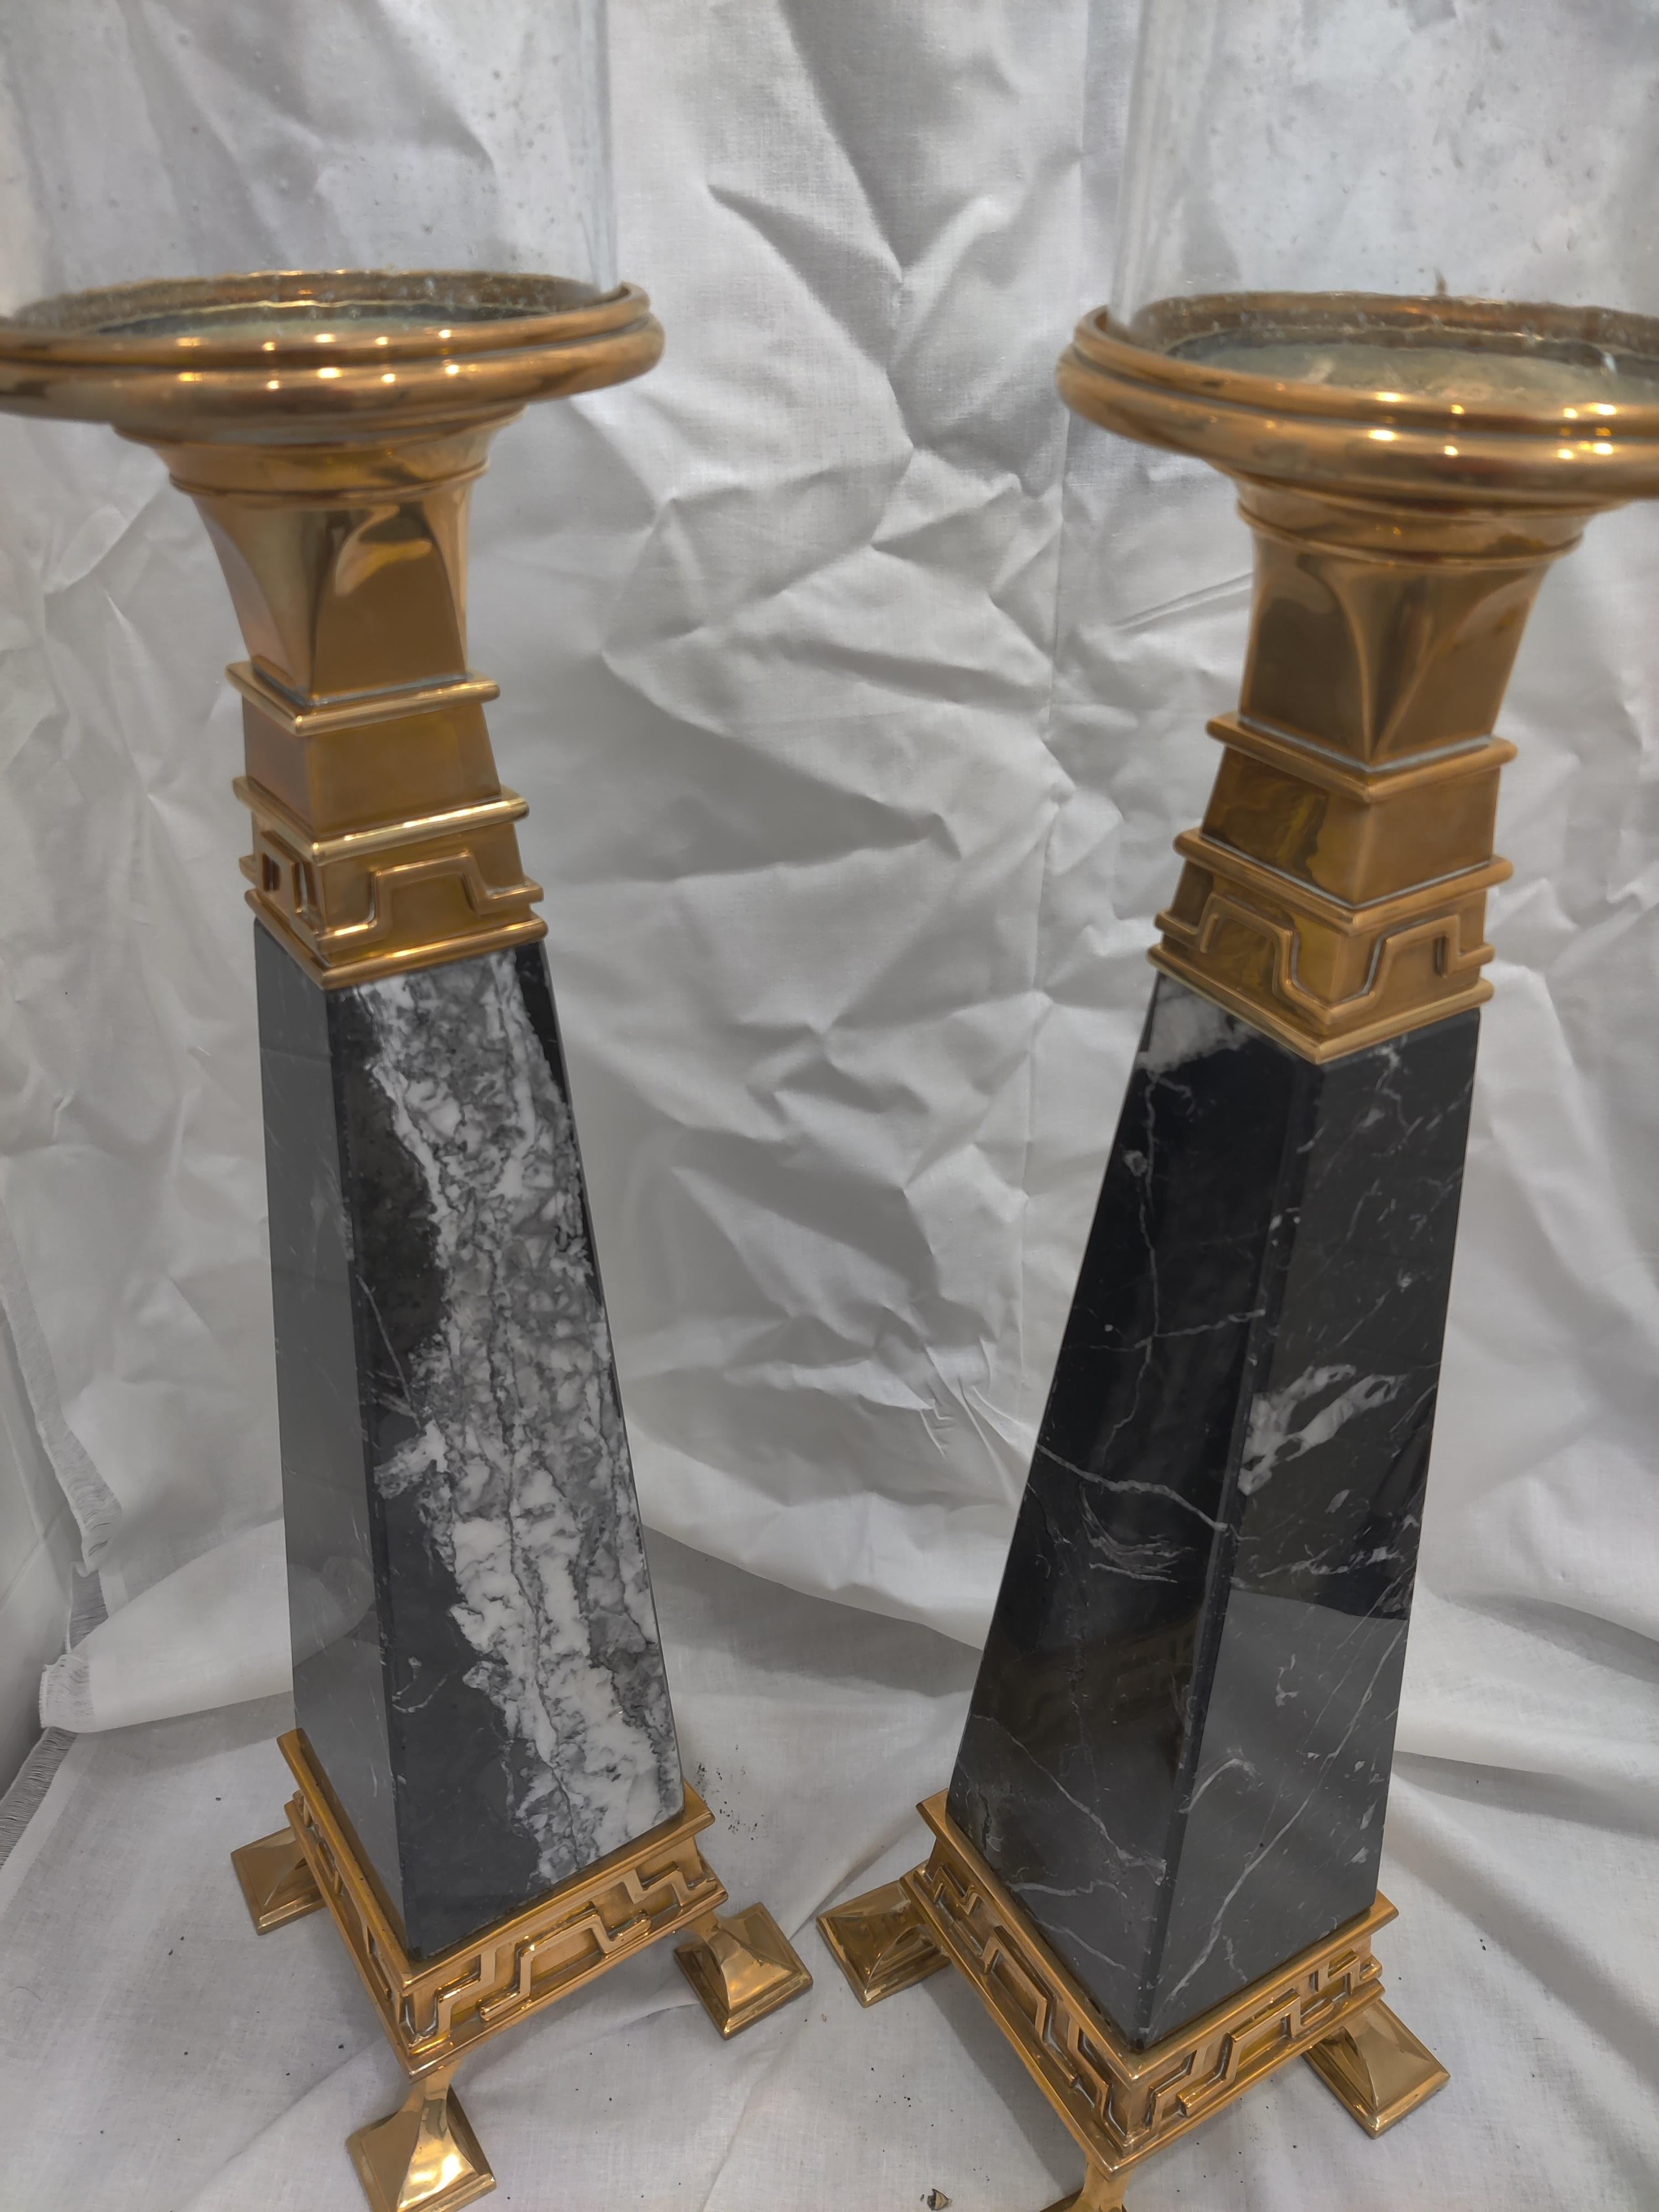 Pair of Chapman Brass and Marble Obelisks
Solid black marble with white
Glass shades have small bubbles, slightly frosted
Possibly would accept being wired with electric.
Looks brand new